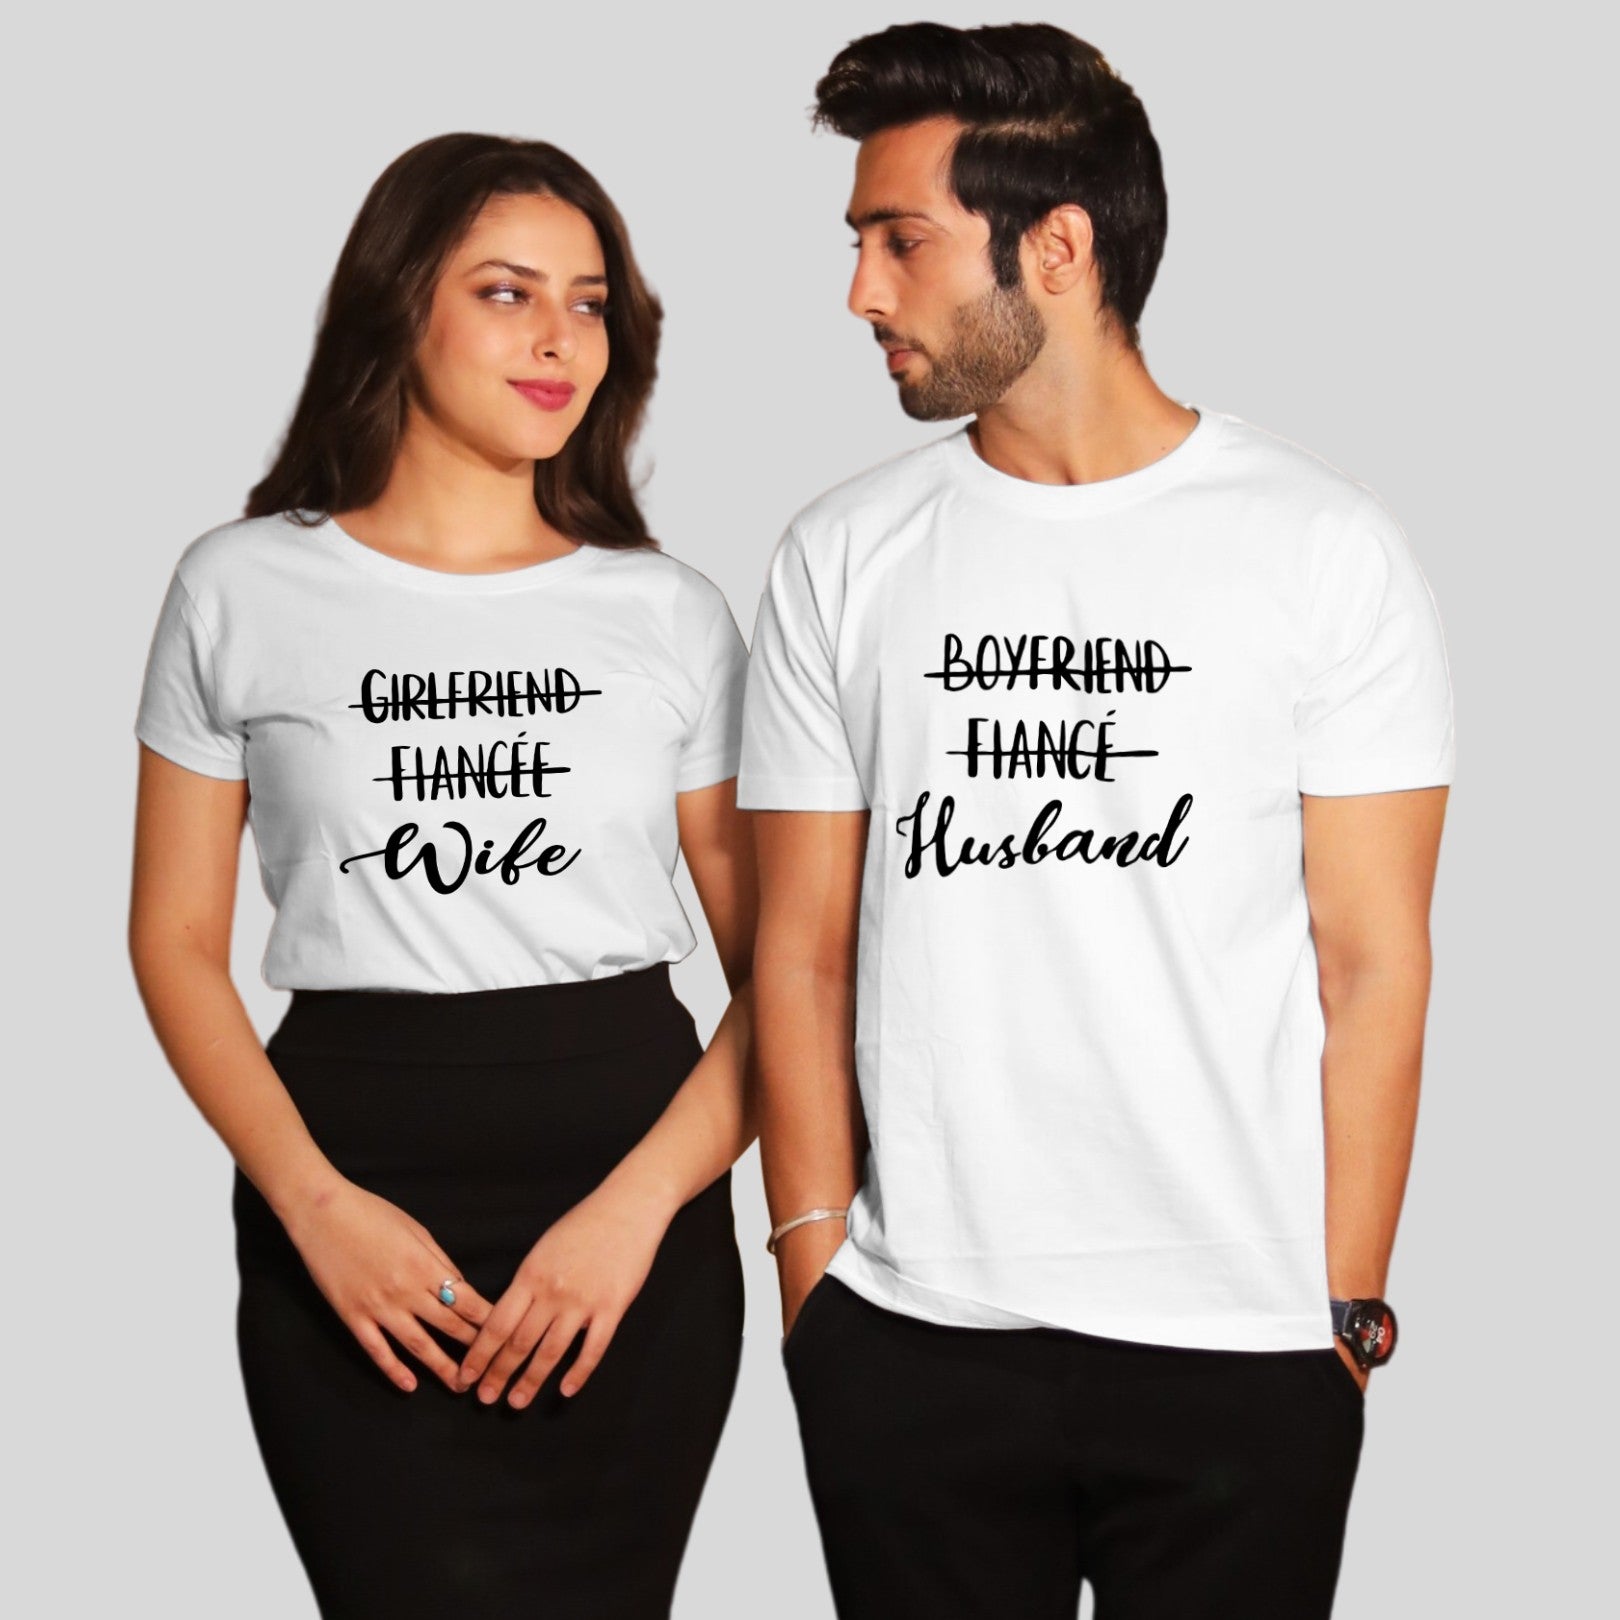 Couple T Shirt for Husband Wife In White Colour - GF Fiance Wife BF Fiance Husband Variant